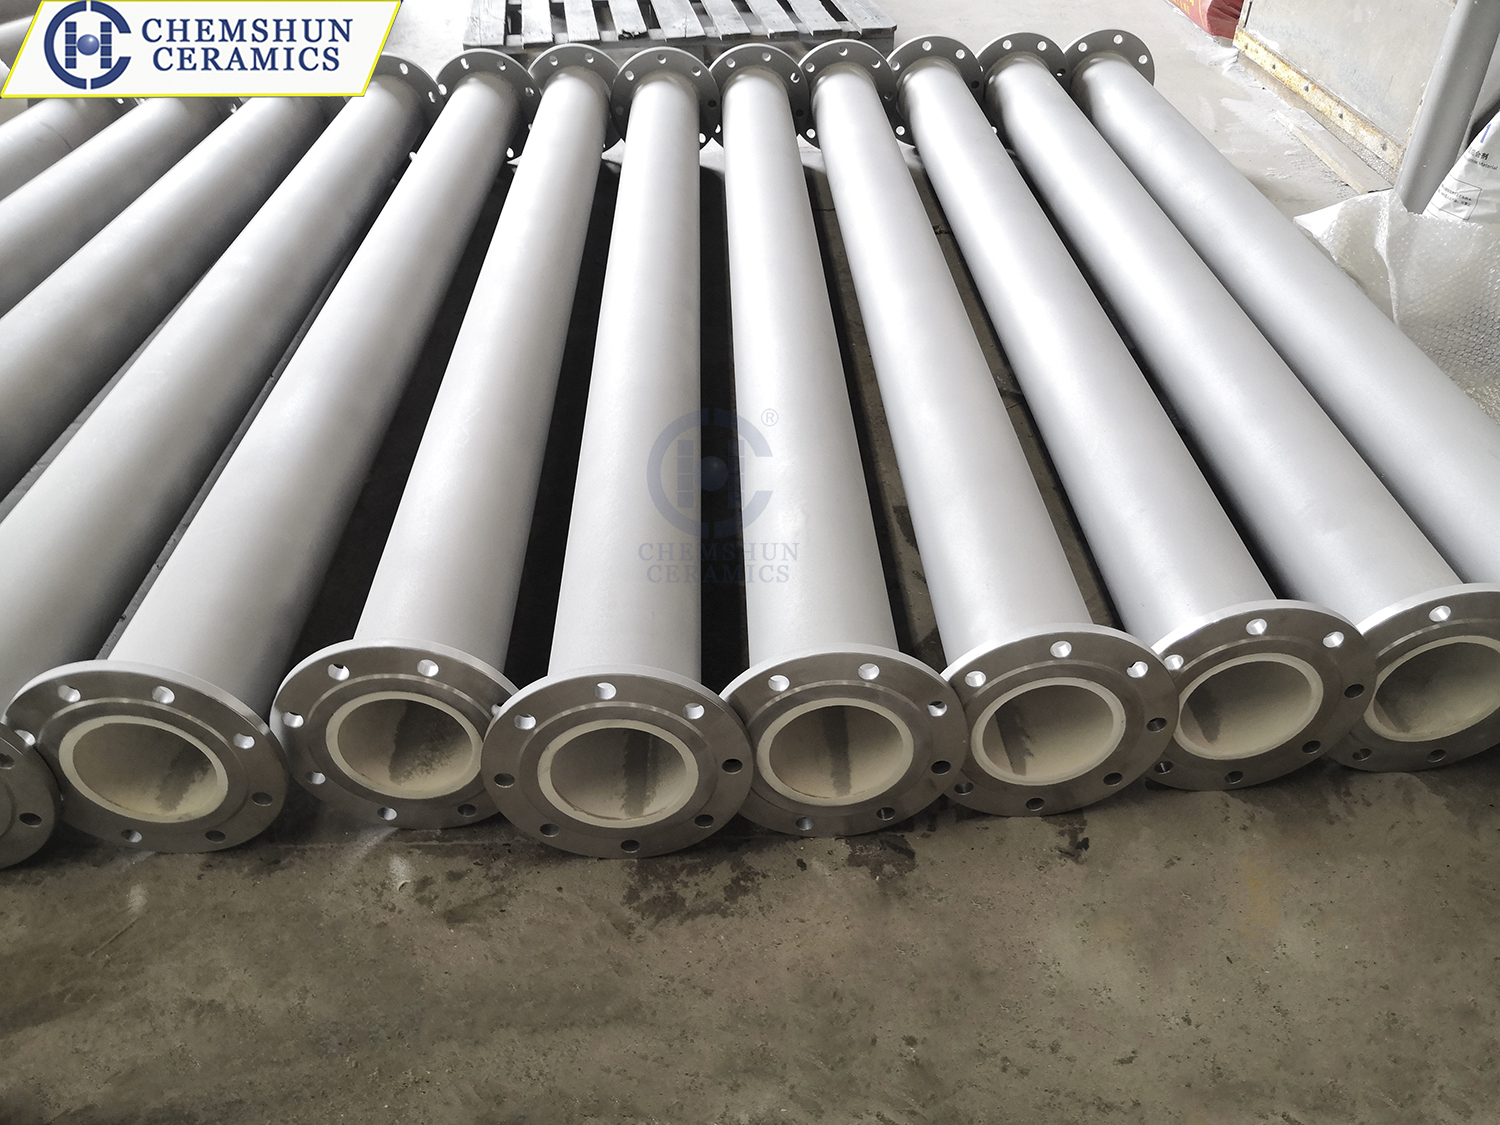 How much do you know about wear resistant pipes？